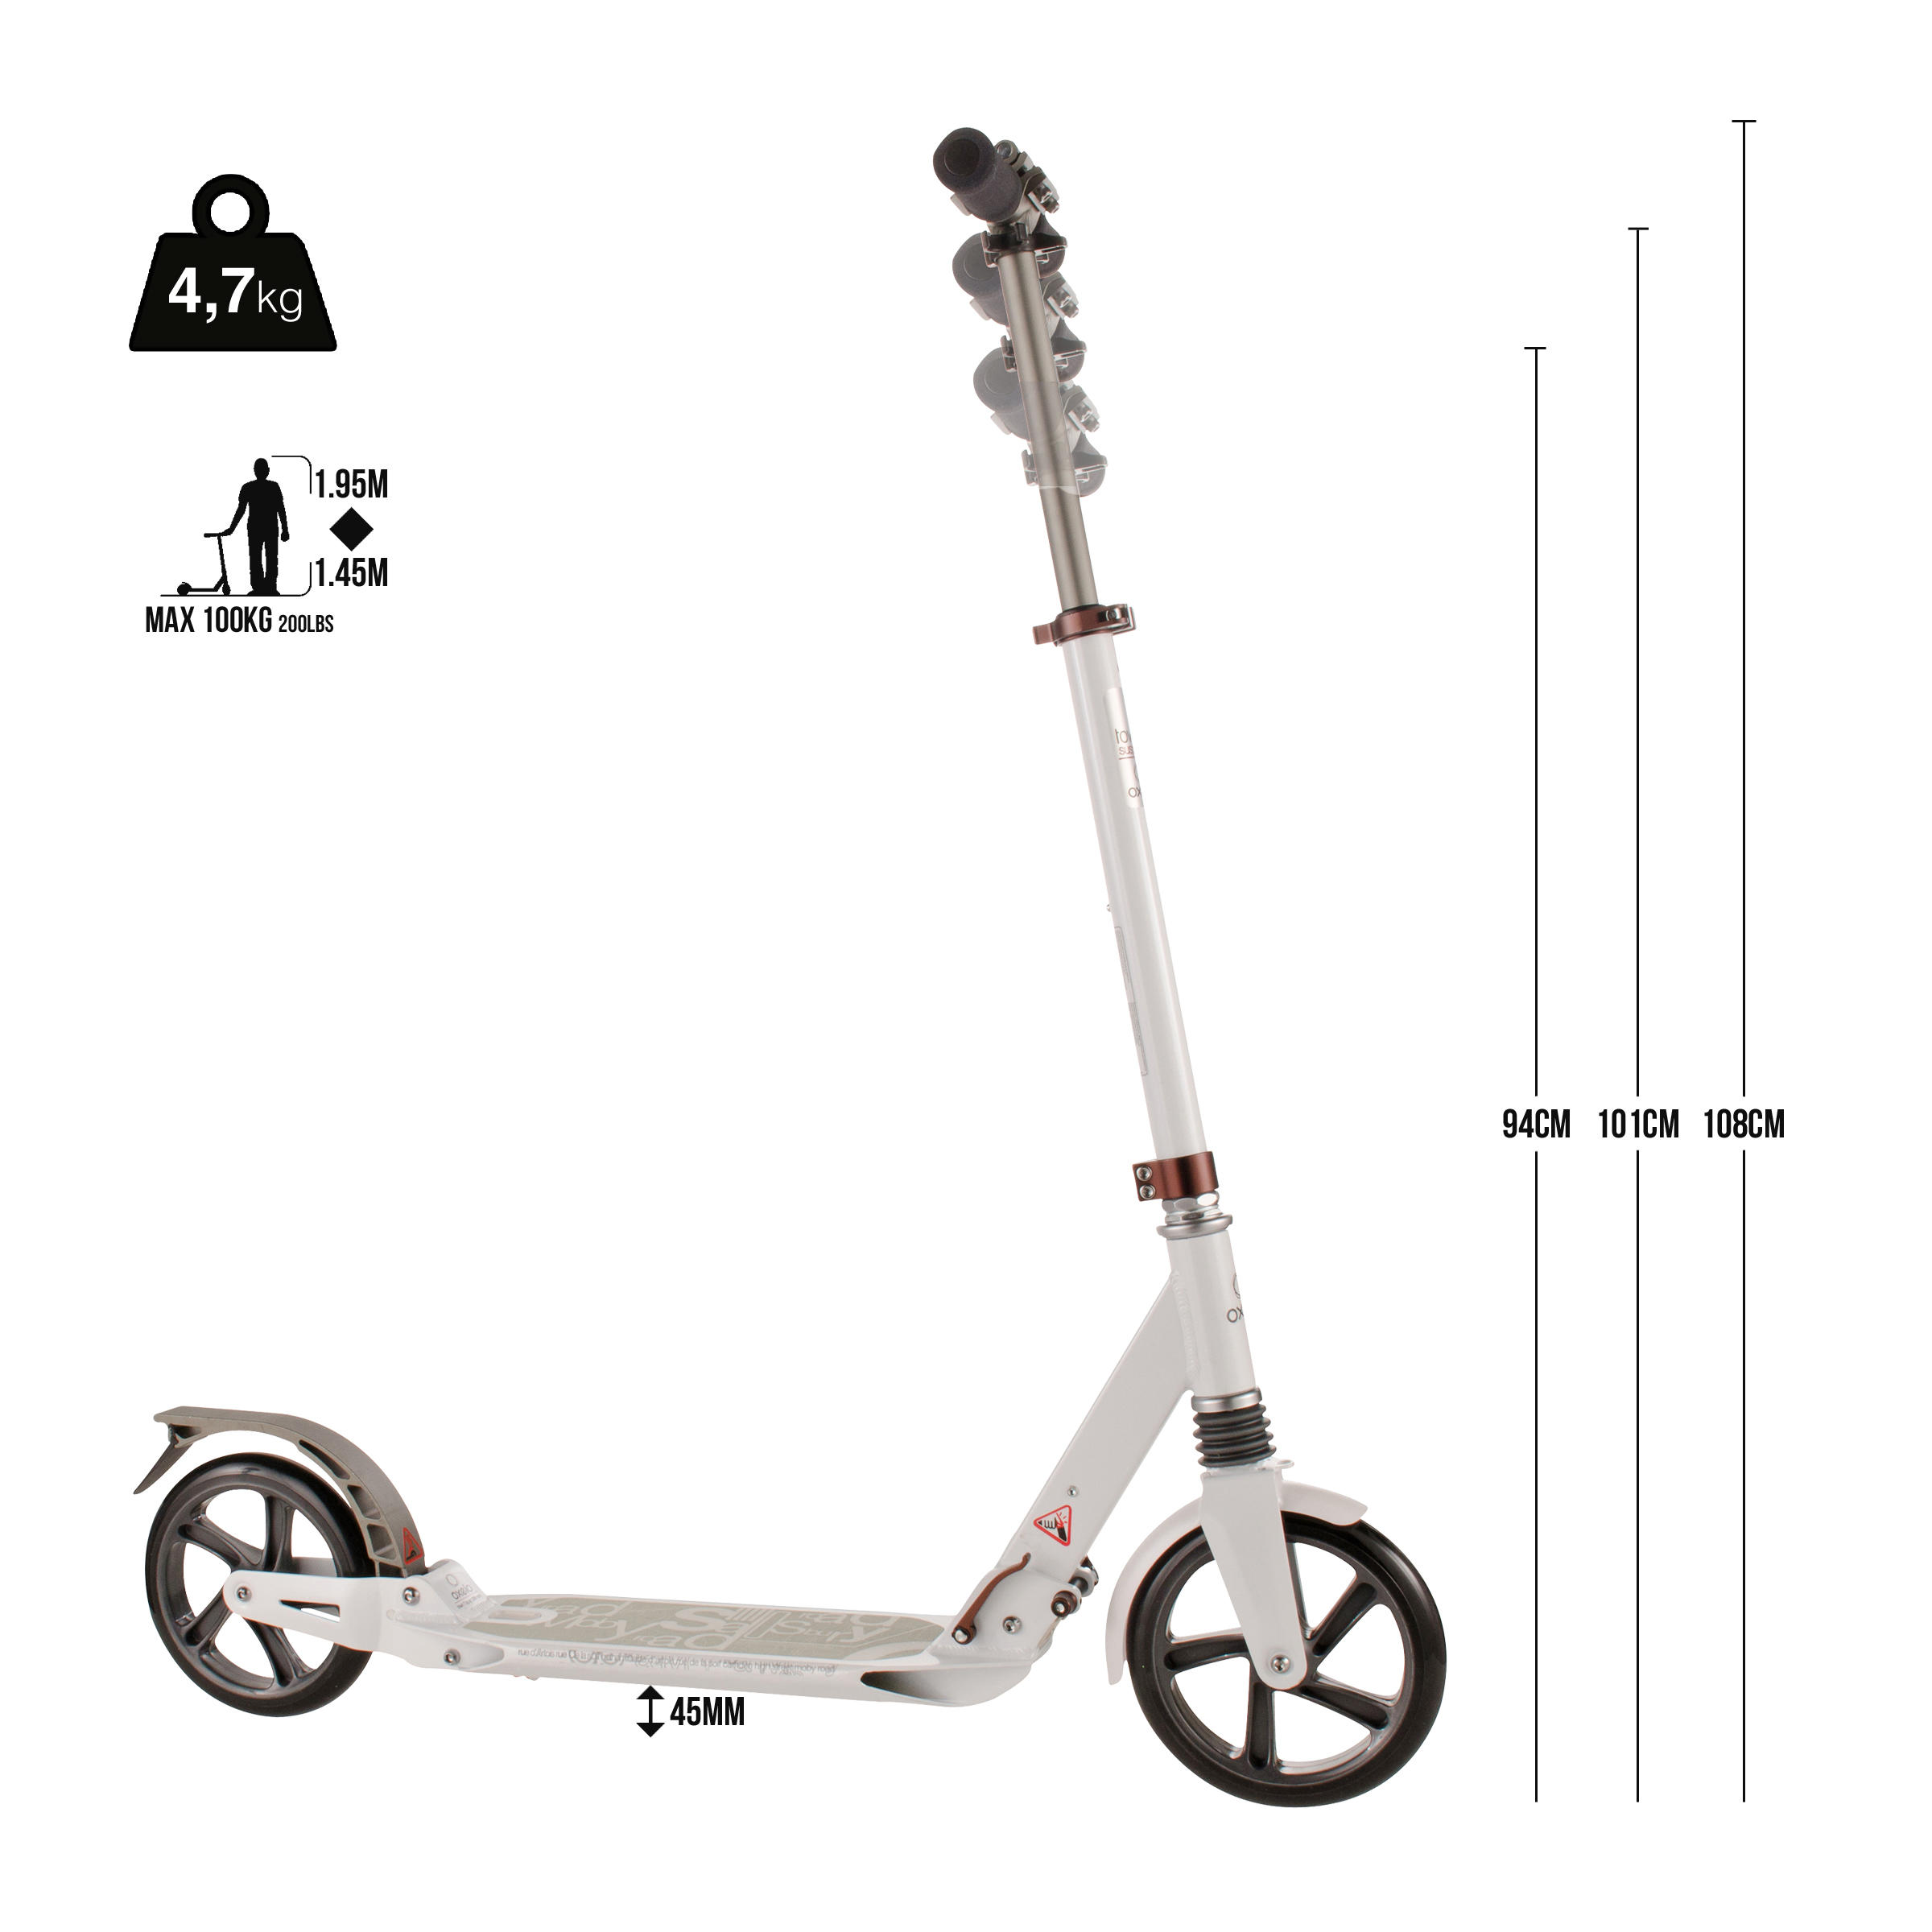 Town 7 XL Adult Scooter - White 6/8